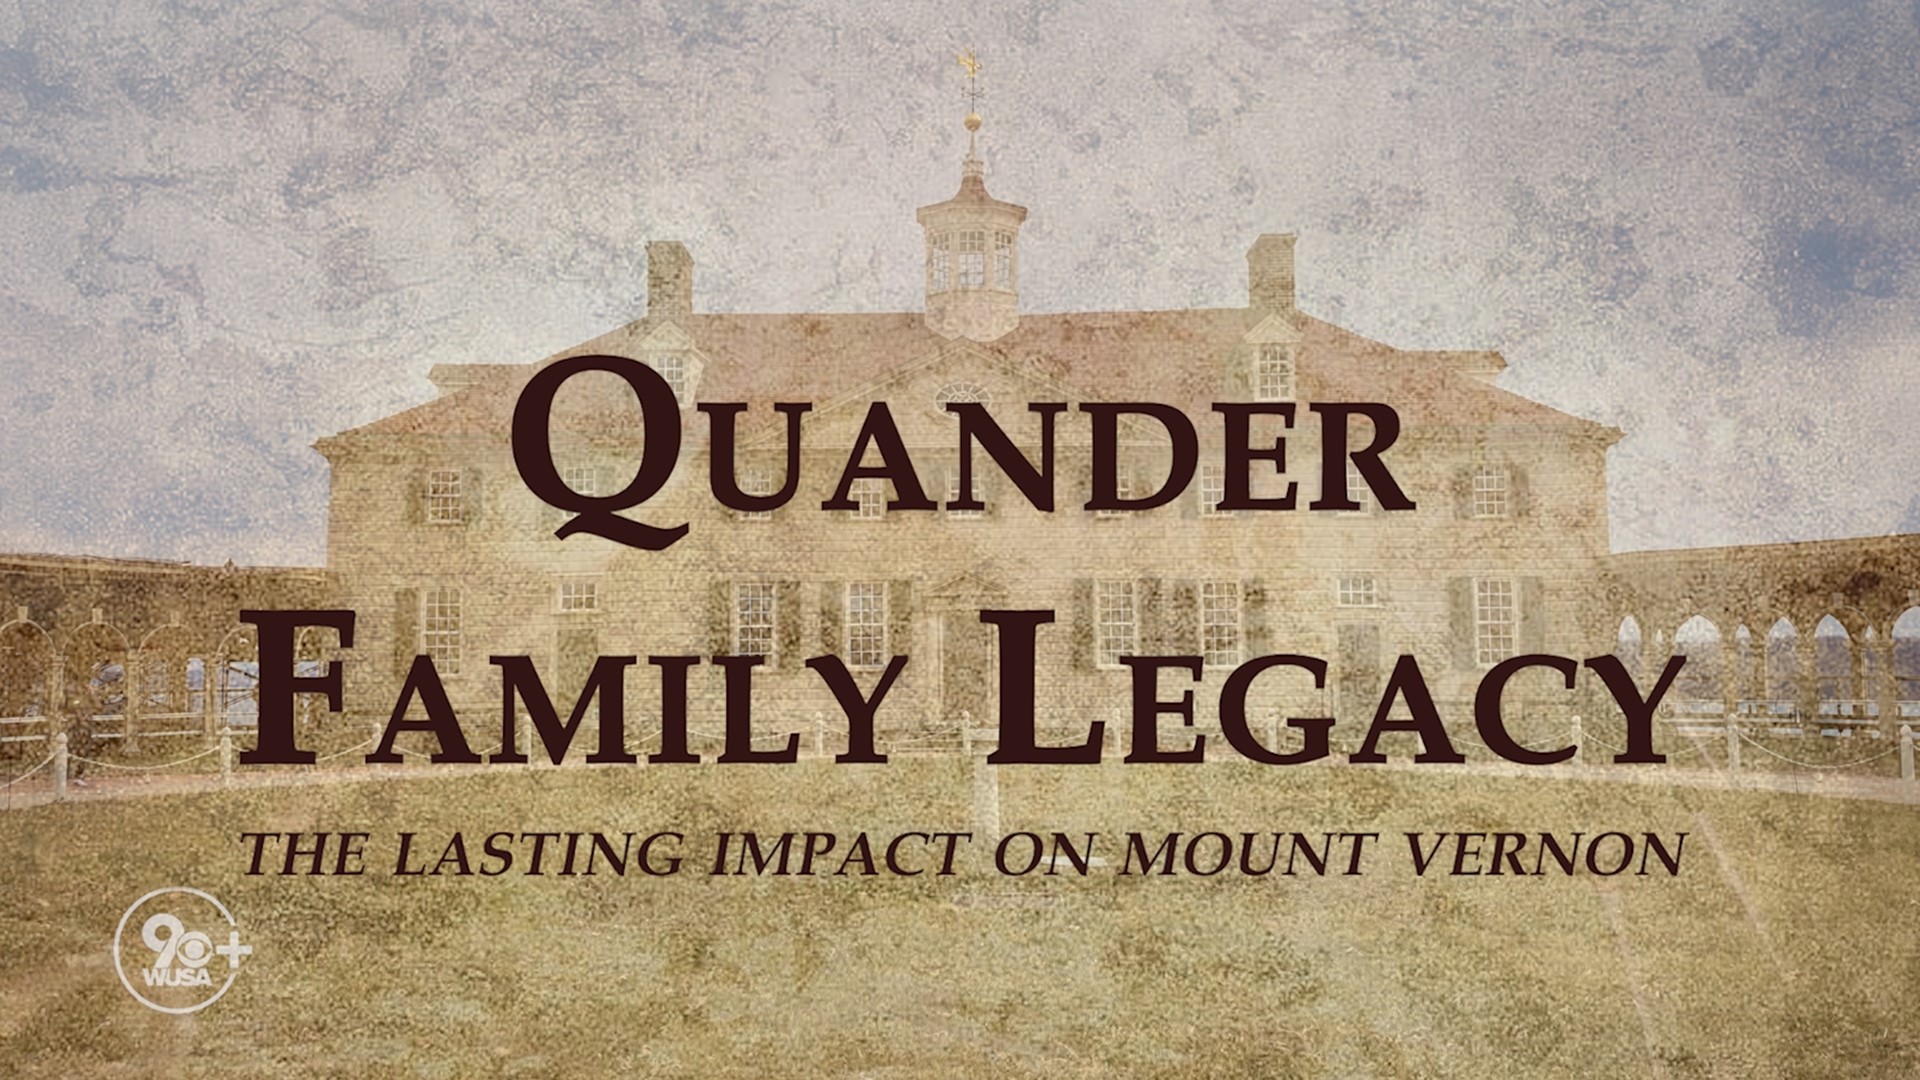 The story of the Quander Family, one of the oldest and most traceable Black families in U.S. history, is explored in this WUSA9+ special.